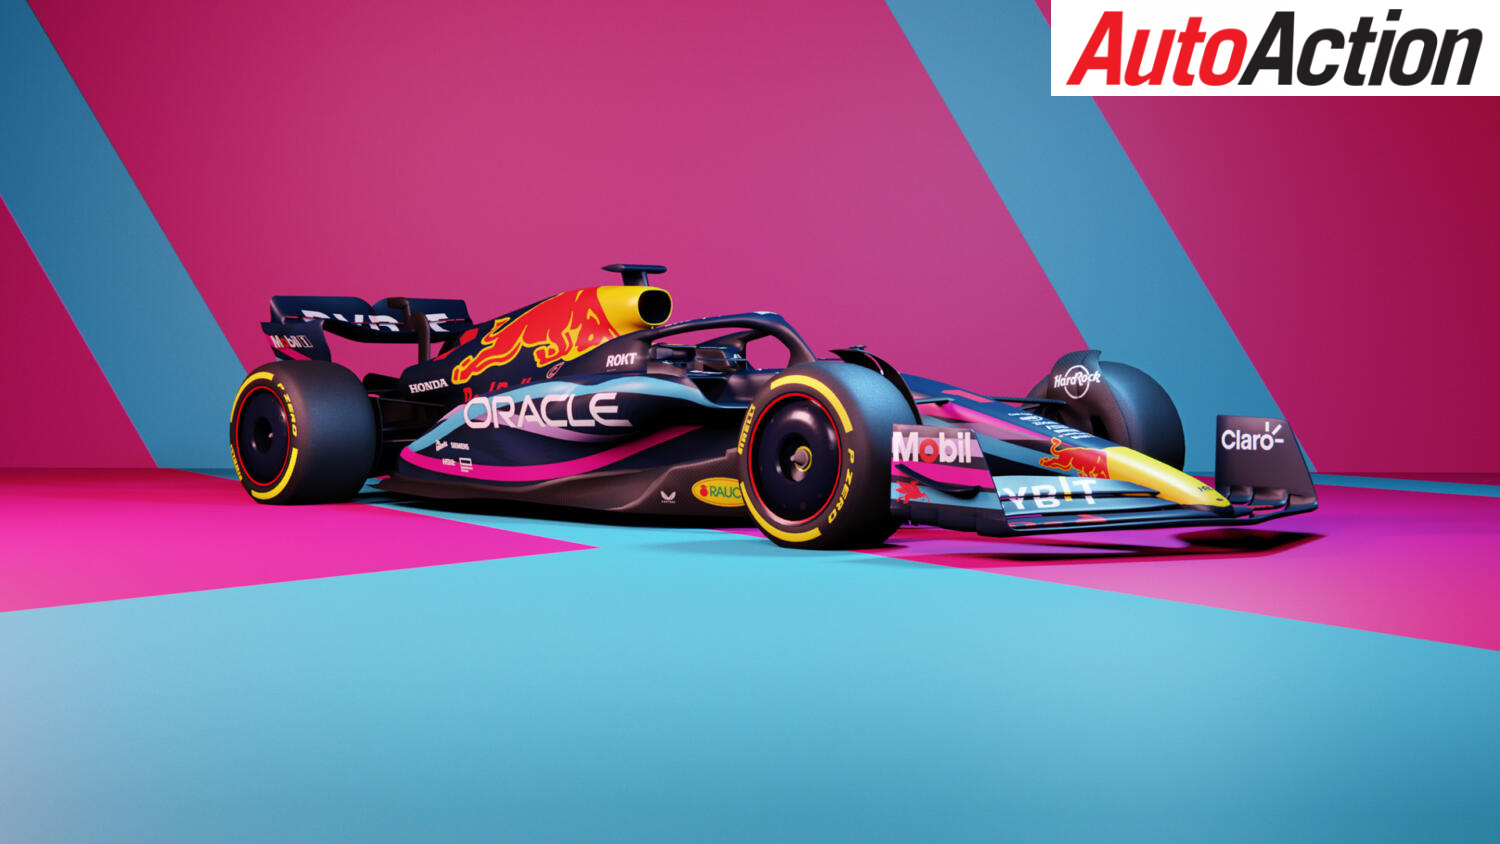 This is Max Verstappen's 2023 Red Bull F1 livery